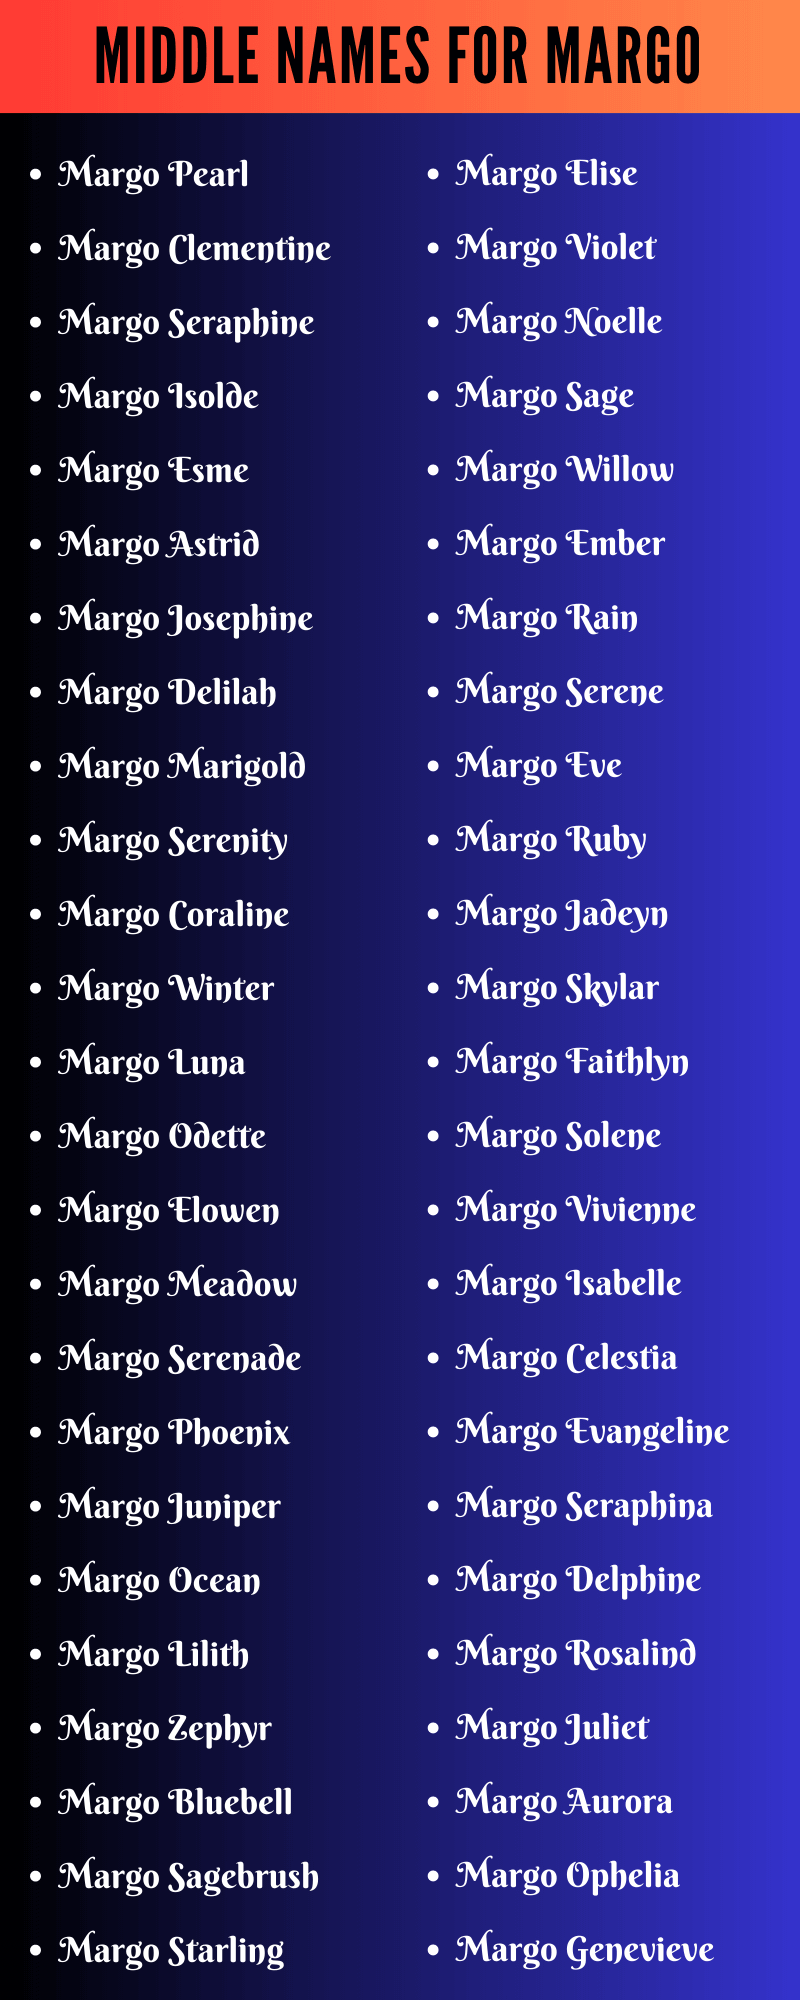 Middle Names For Margo